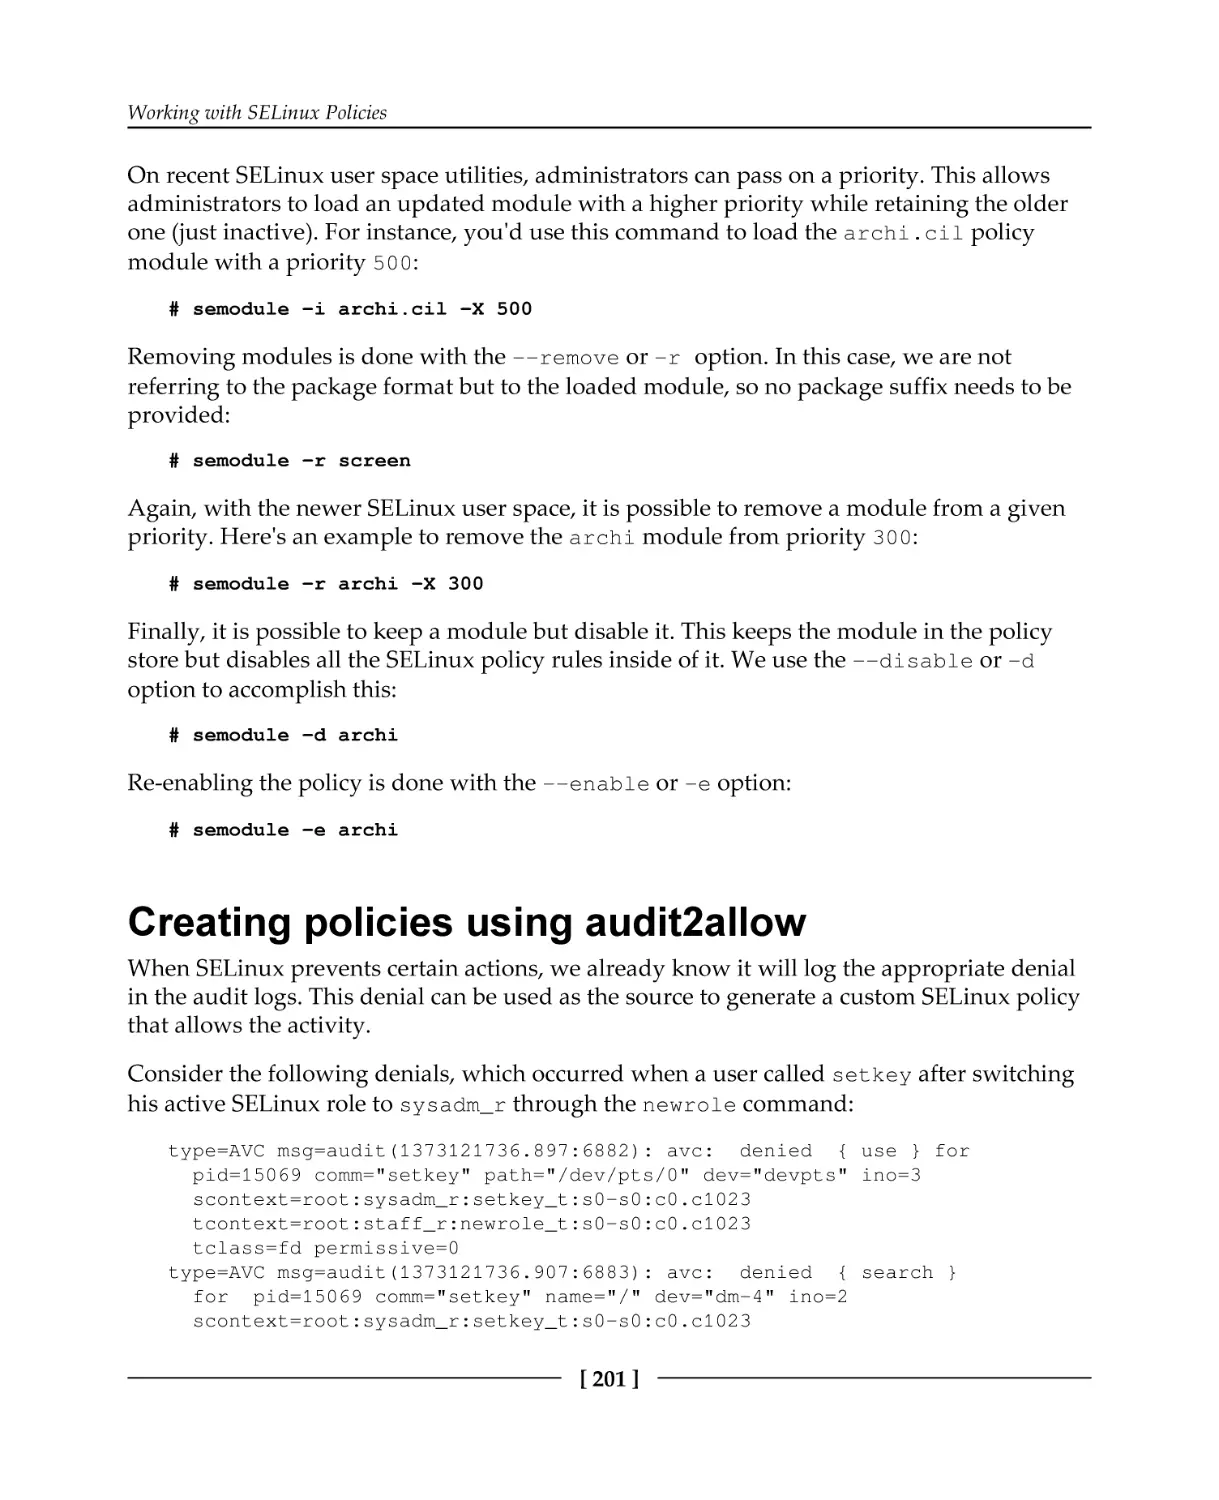 Creating policies using audit2allow